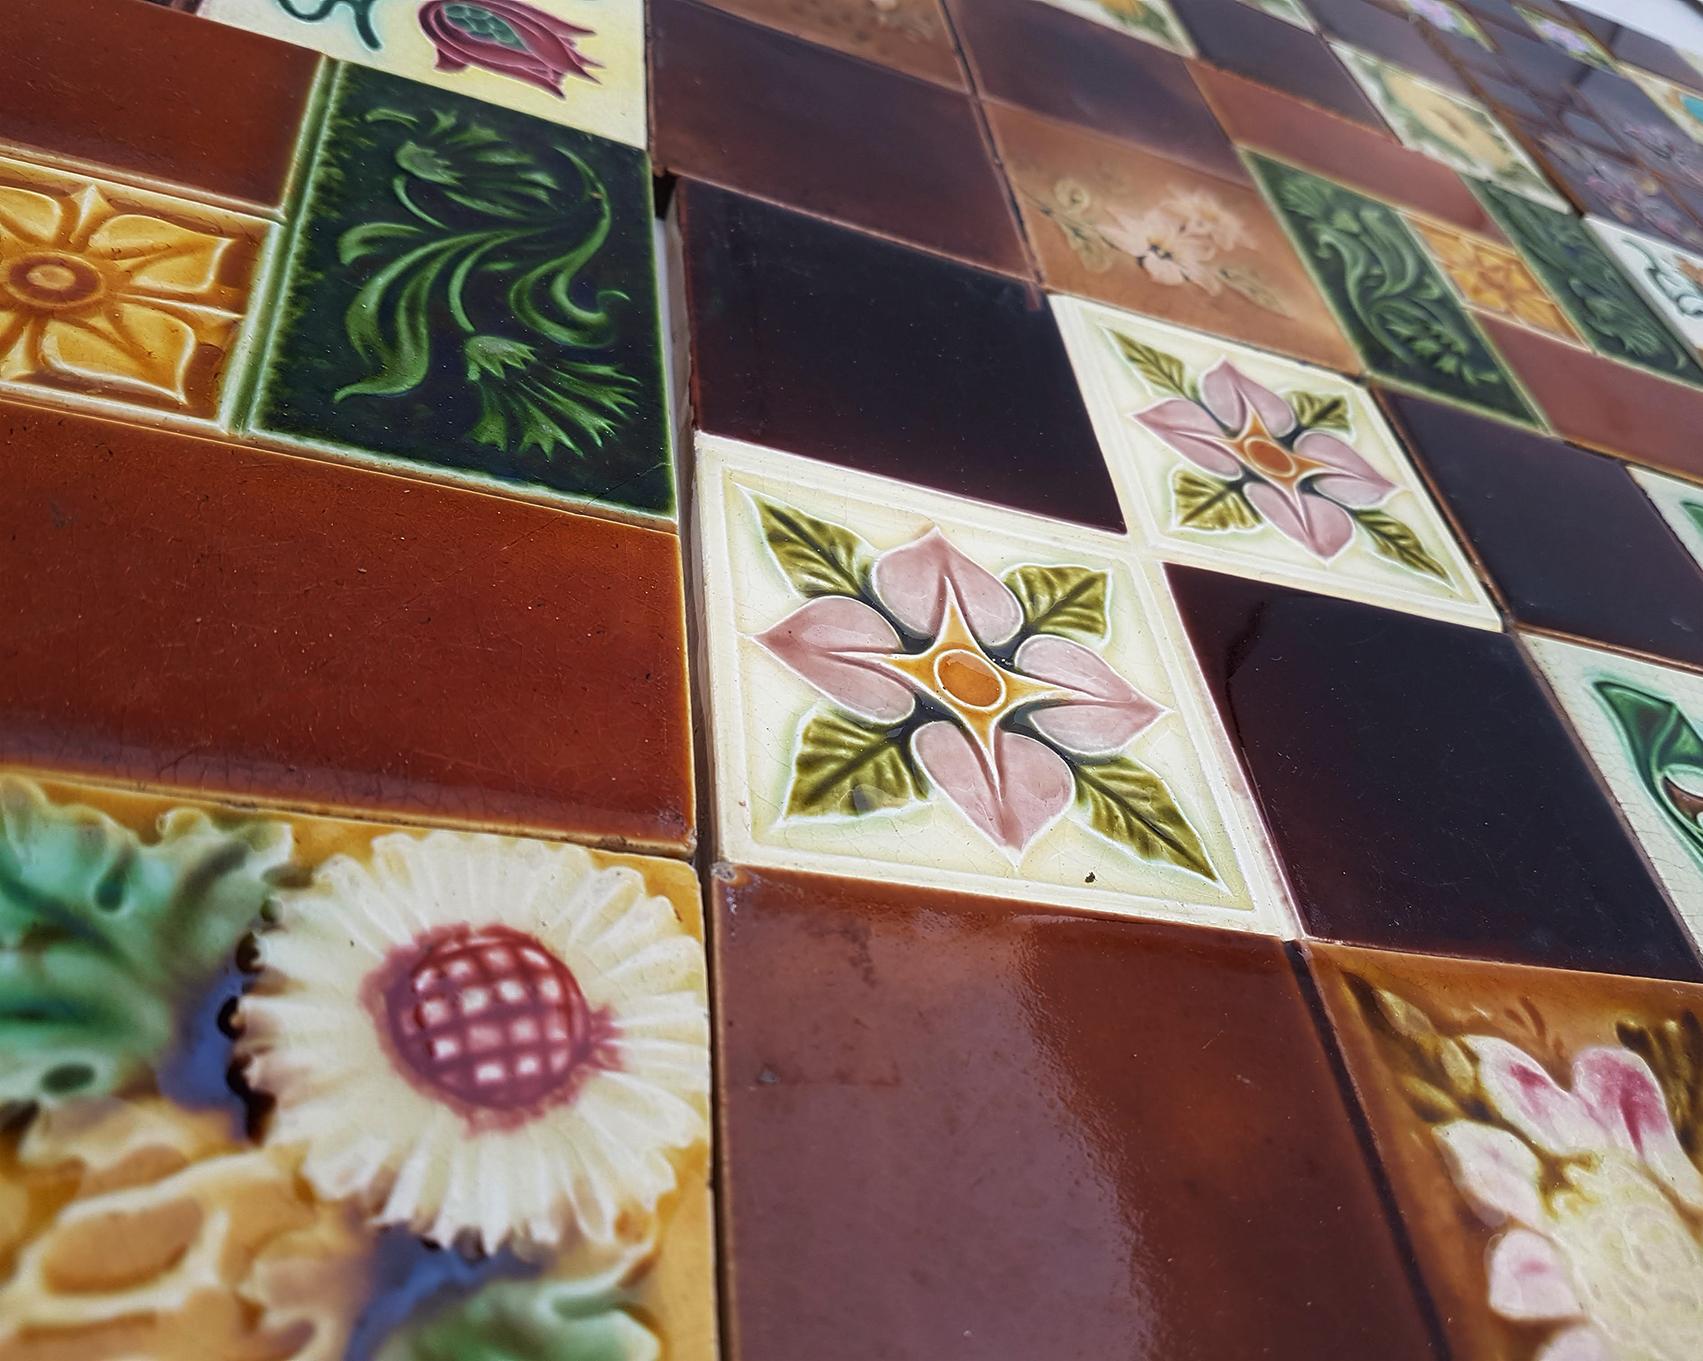 This is an amazing set of Art Jugenstil handmade tiles. A beautiful relief and color. With a different stylized design, on a brown ground, these tiles would be charming displayed on easels, framed or incorporated into a custom tile design

Size